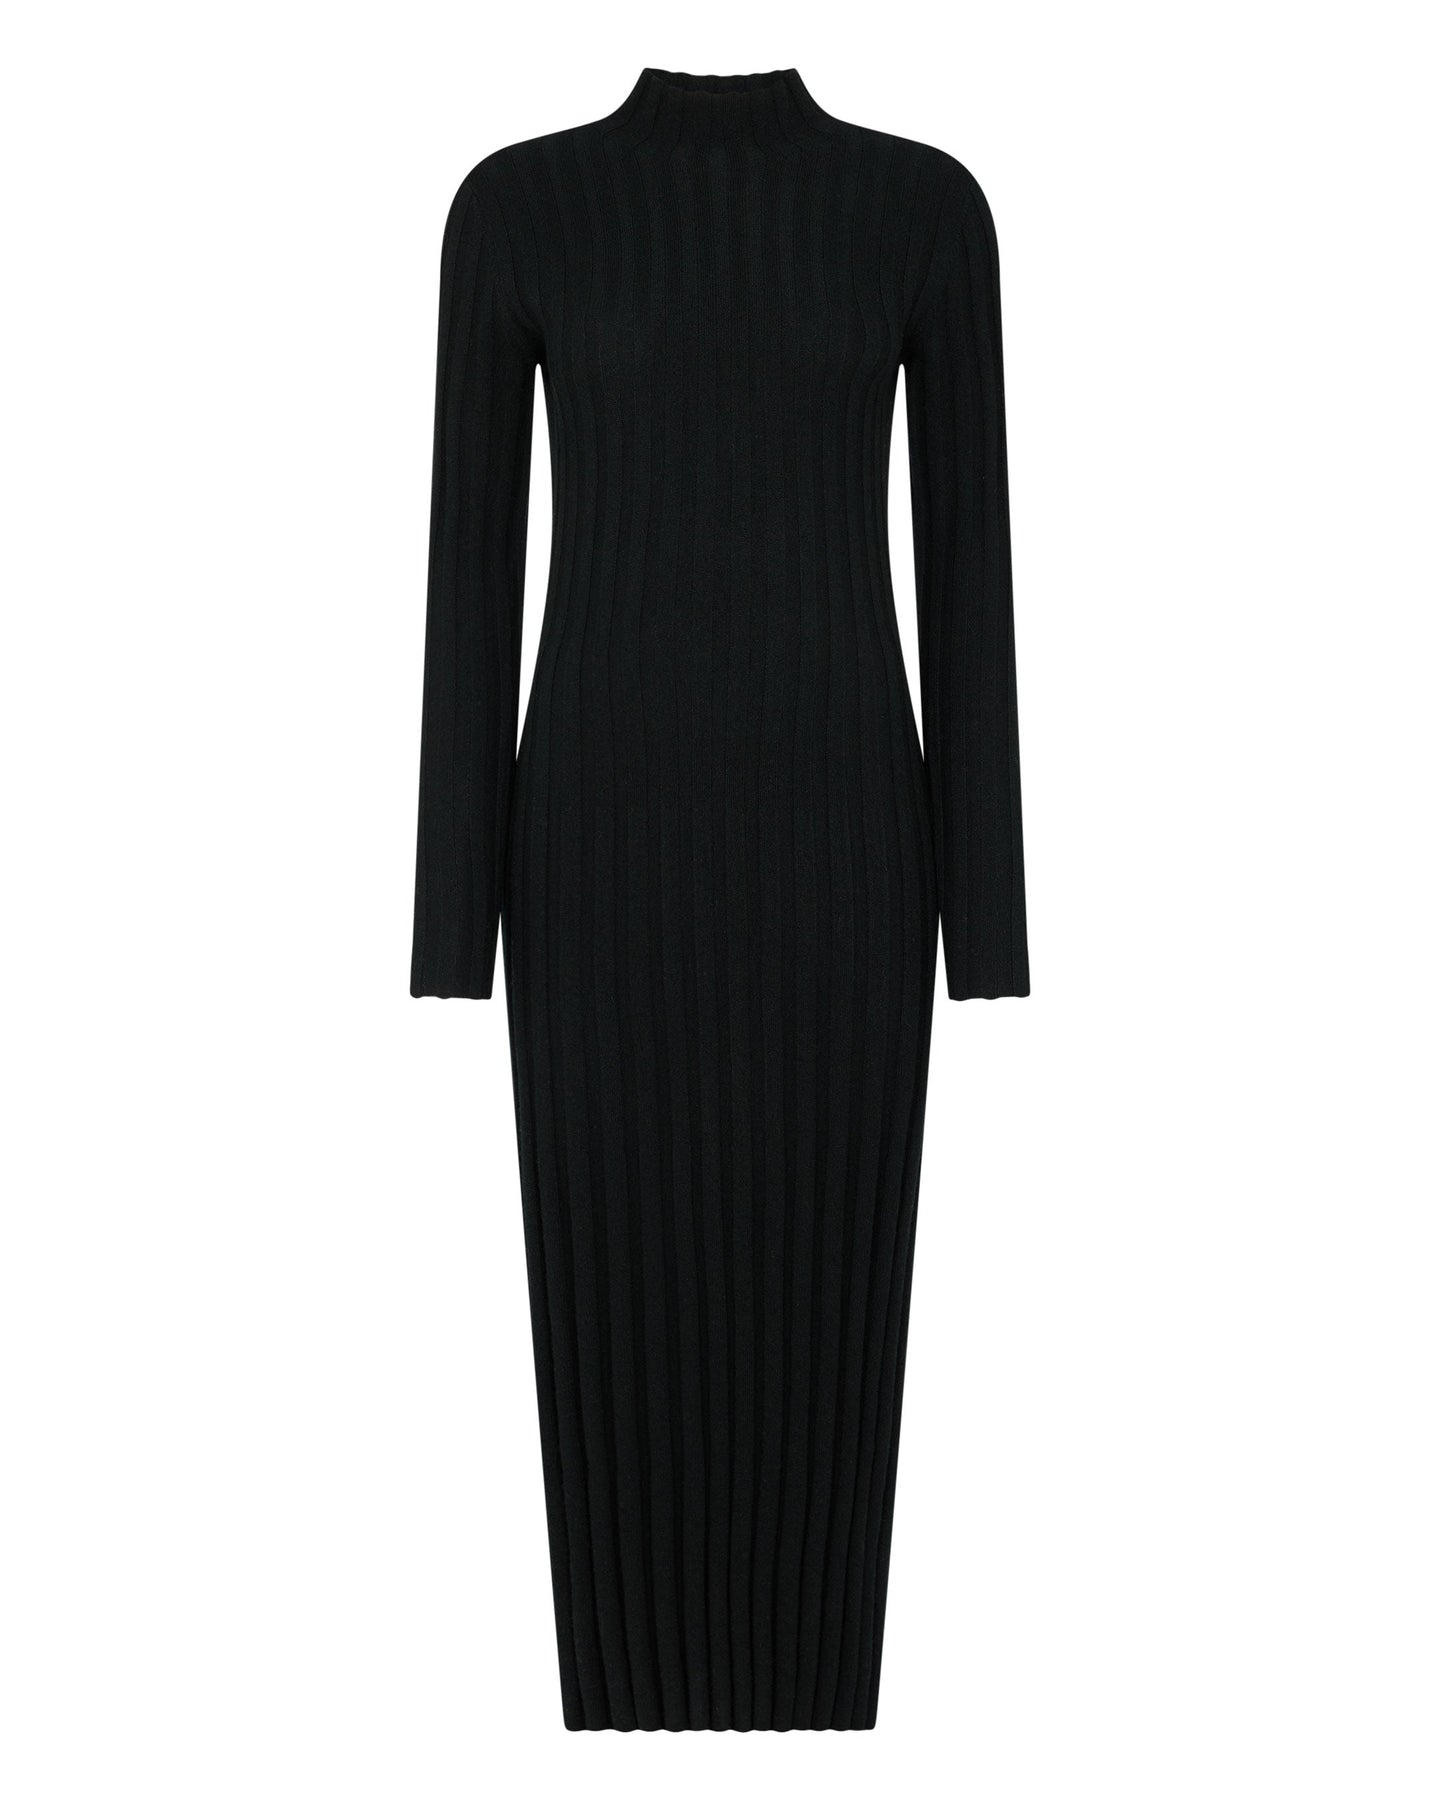 N.Peal Women's Long Ribbed Cashmere Dress Black